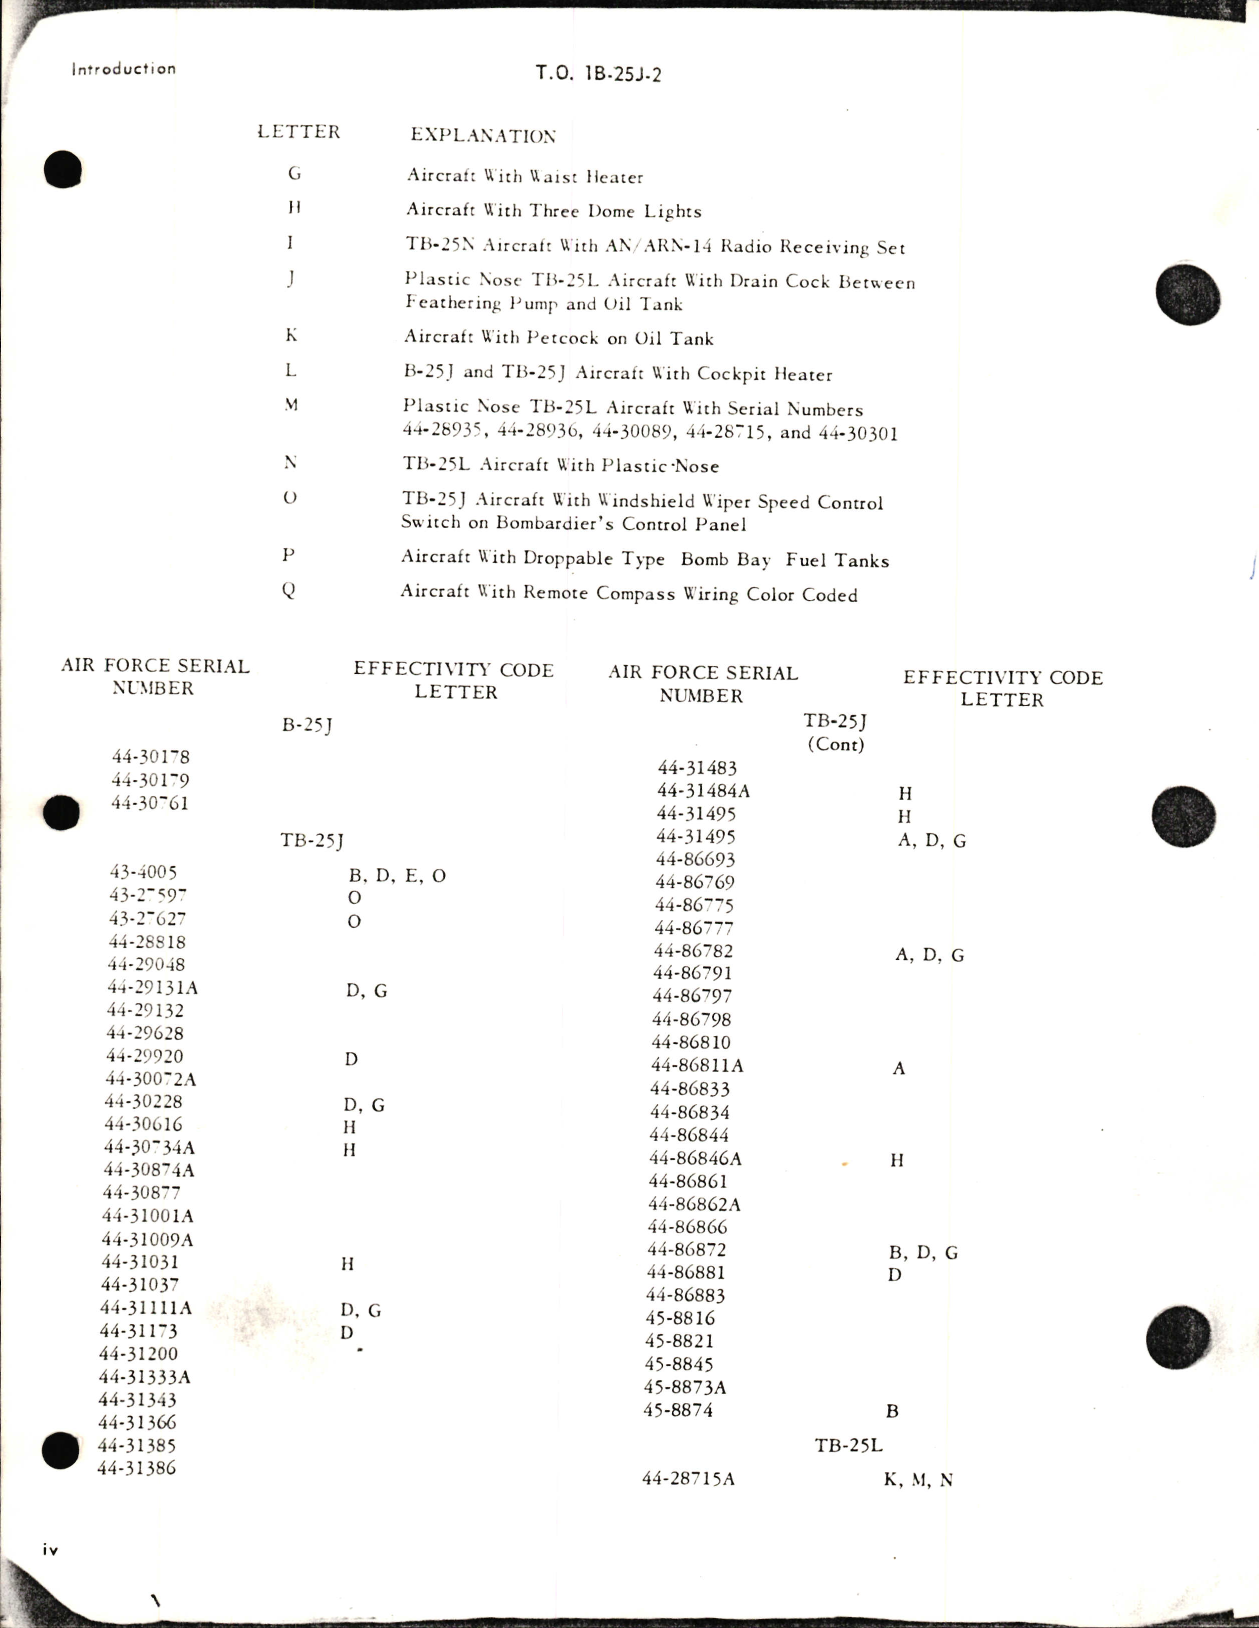 Sample page 6 from AirCorps Library document: Maintenance Instructions for B-25J, TB-25J, TB-25L, TB-25L-1, and TB-25N